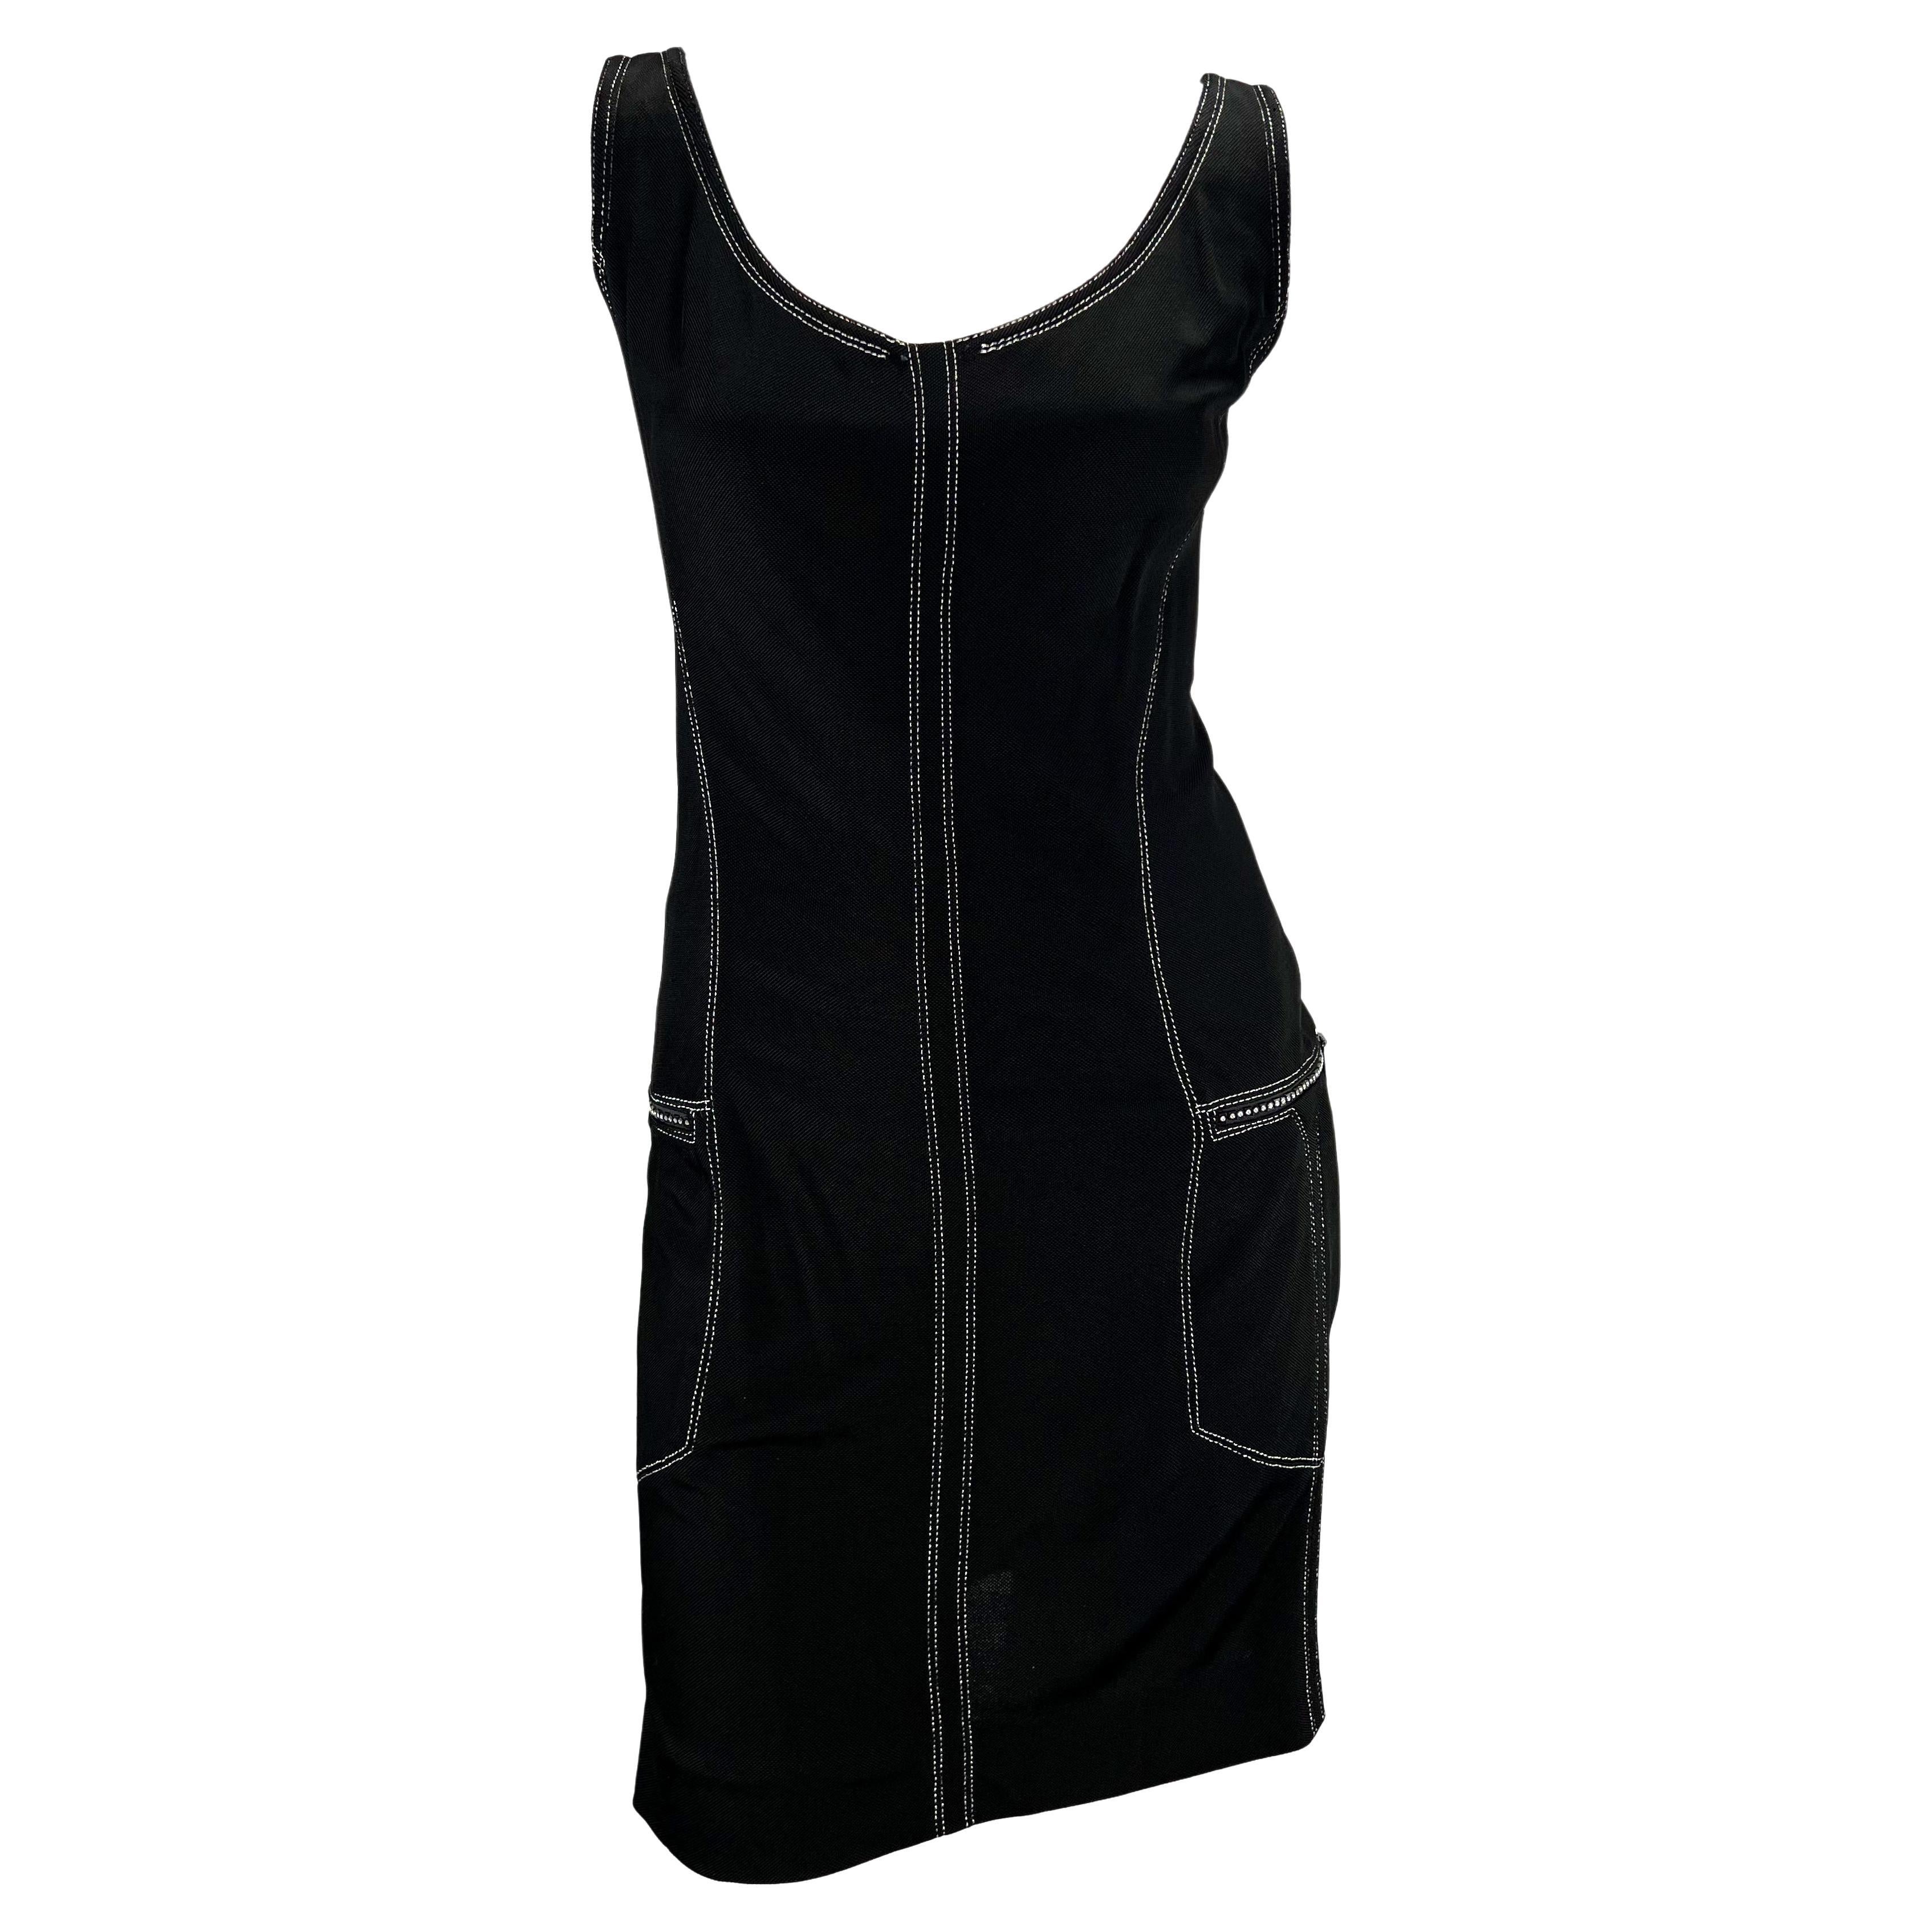 Presenting a black sleeveless Gianni Versace Couture dress, designed by Gianni Versace. From the Spring/Summer 1996 collection, this knit dress is finished with silver stitching and rhinestone accented zipper pockets at either hip. A fabulous and